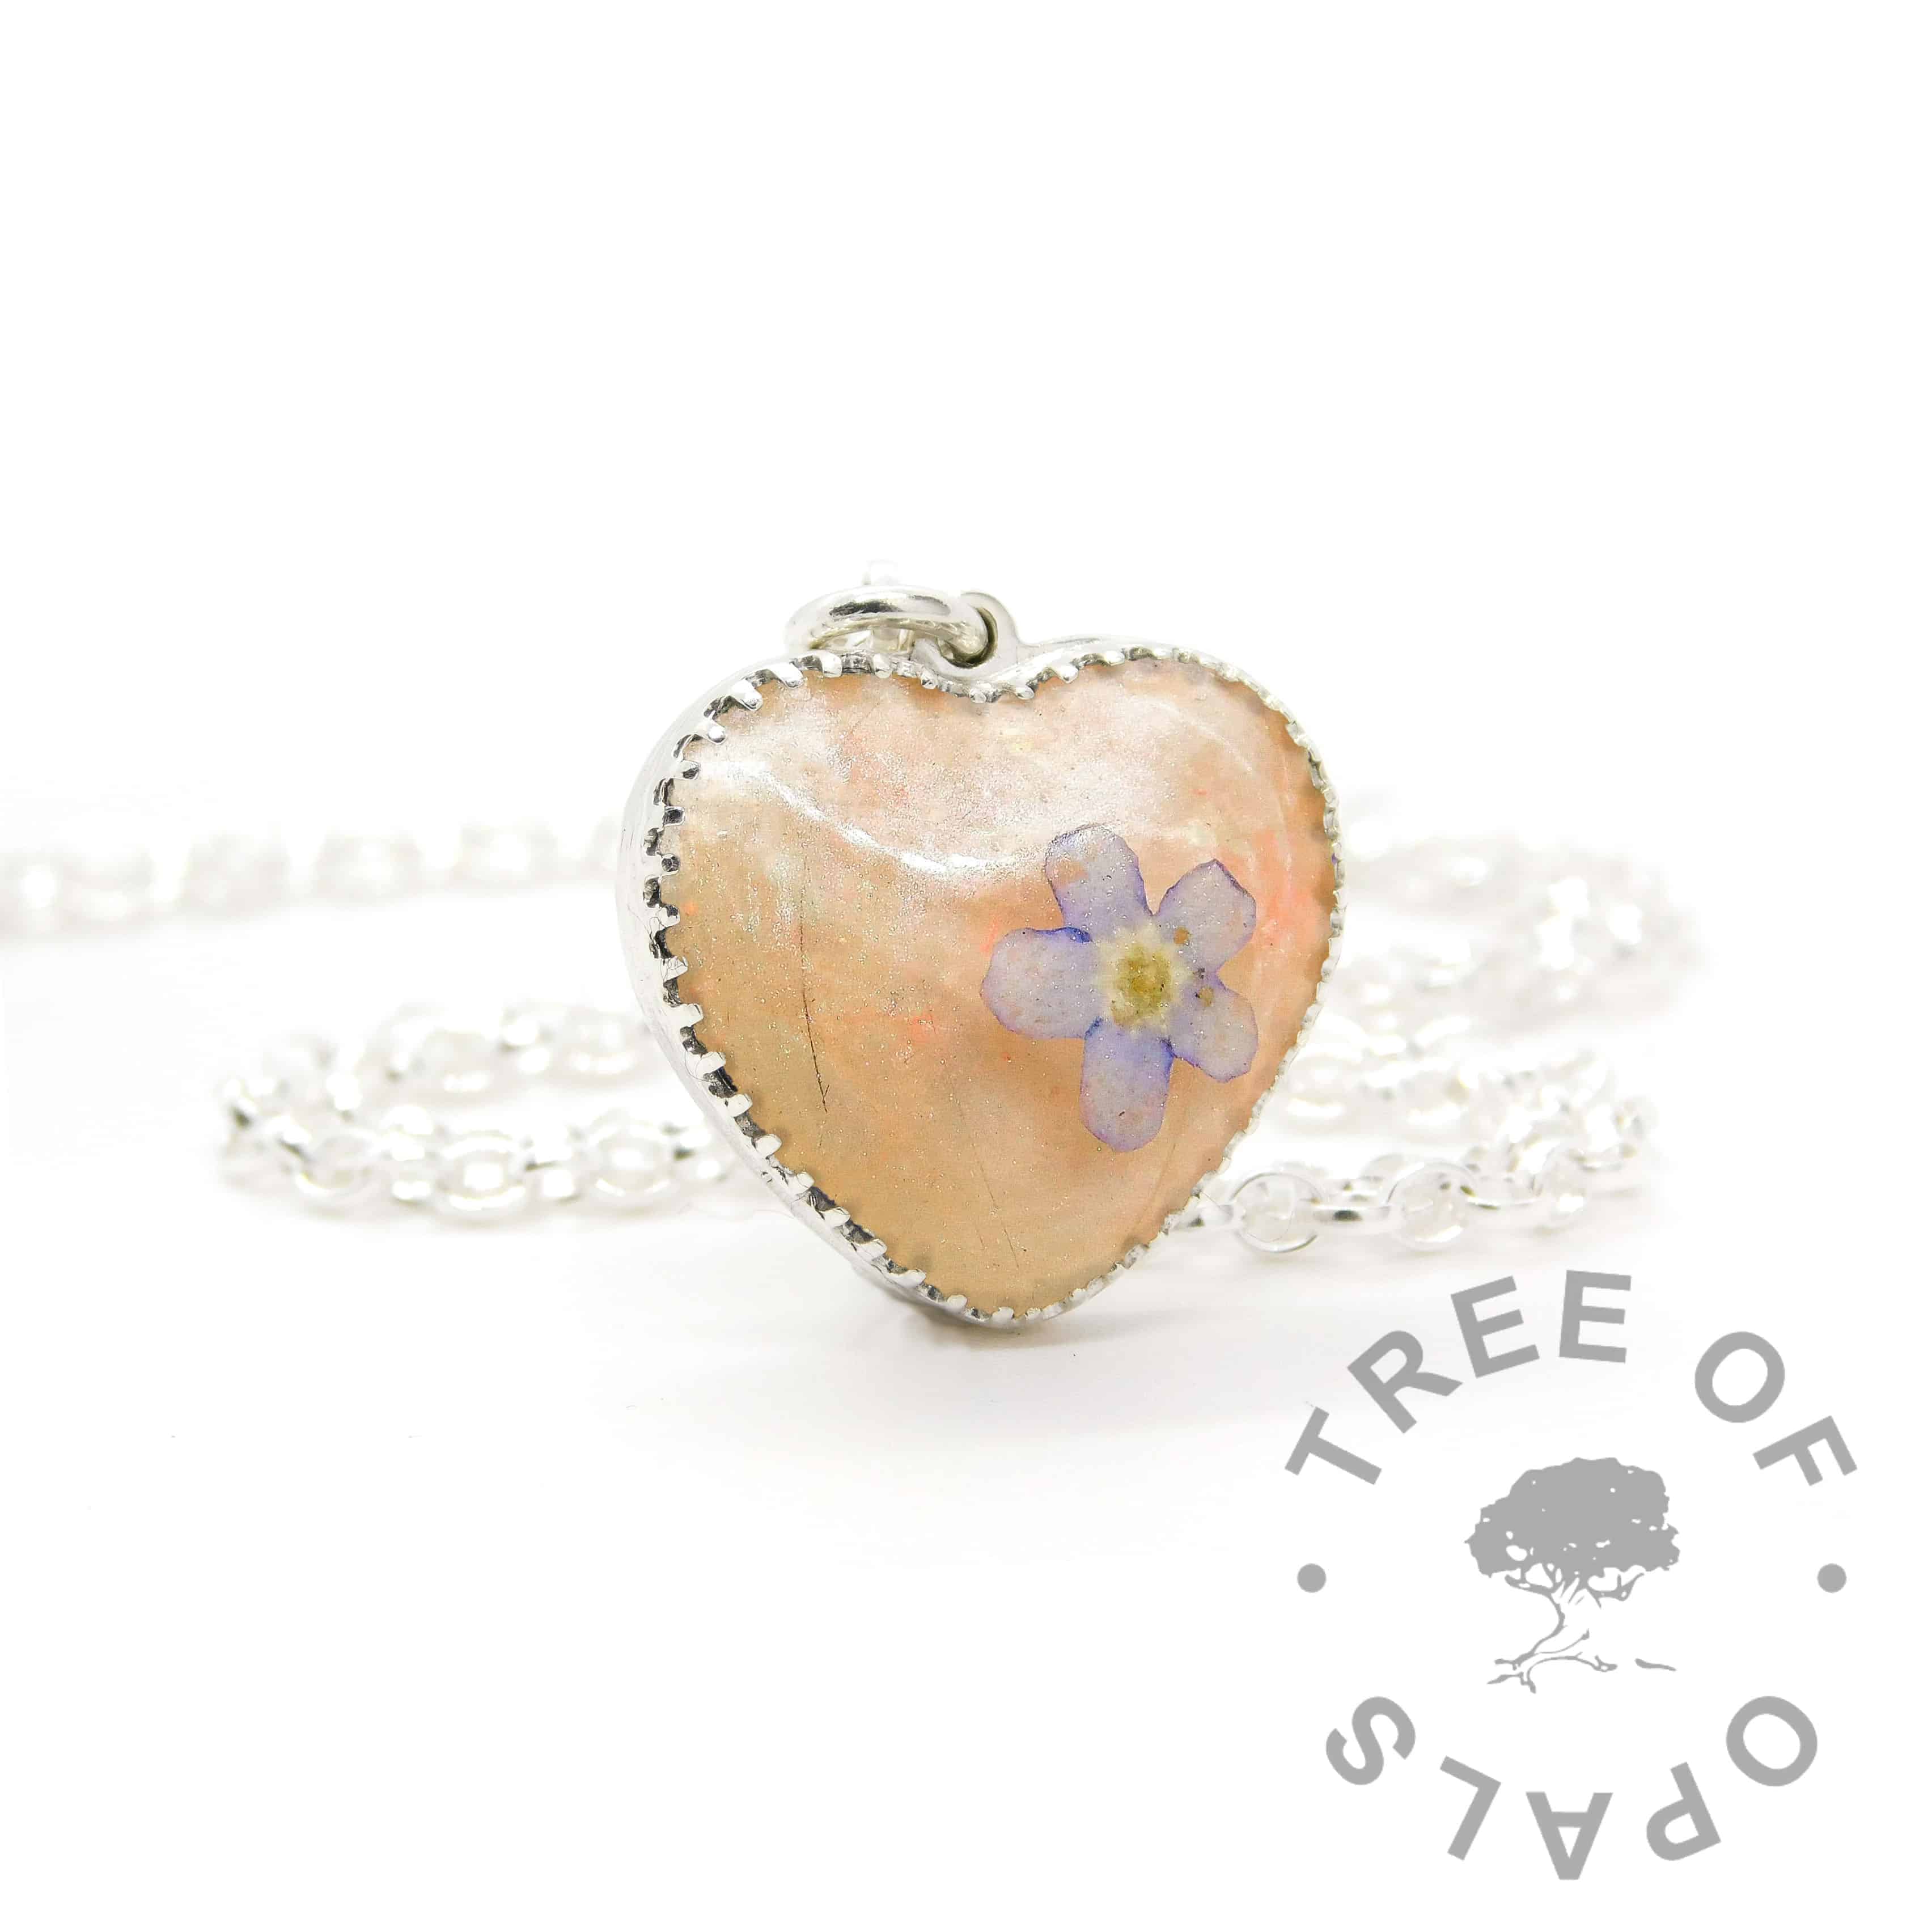 New style heart necklace setting with scalloped edge. Fairy pink resin sparkle mix, lock of hair, shaped forget me not, shown with a medium classic chain upgrade (mockup of new setting). Remember that "white hair" is often translucent in resin!